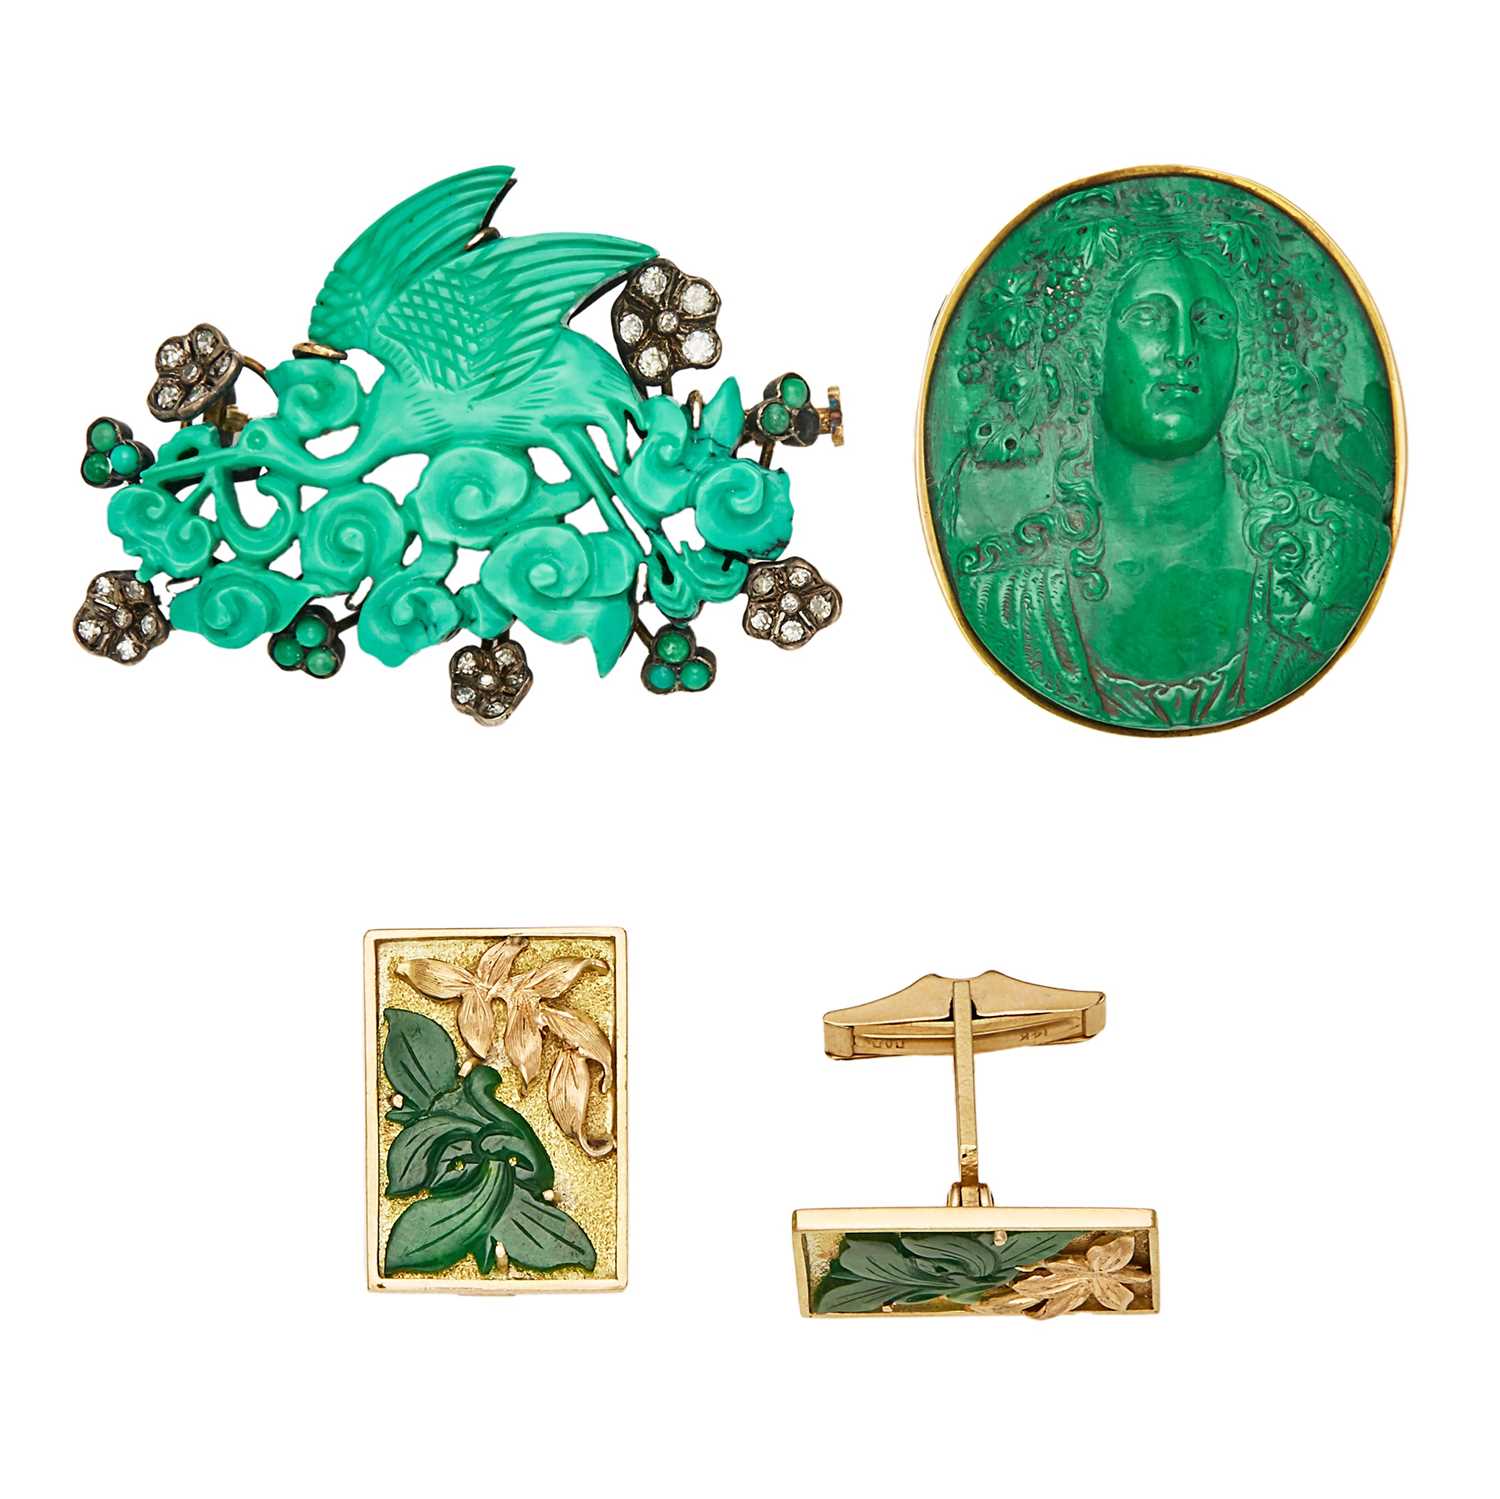 Lot 2097 - Gold, Silver, Turquoise and Diamond Brooch, Gold and Carved Malachite Brooch and Pair of Jade Cufflinks